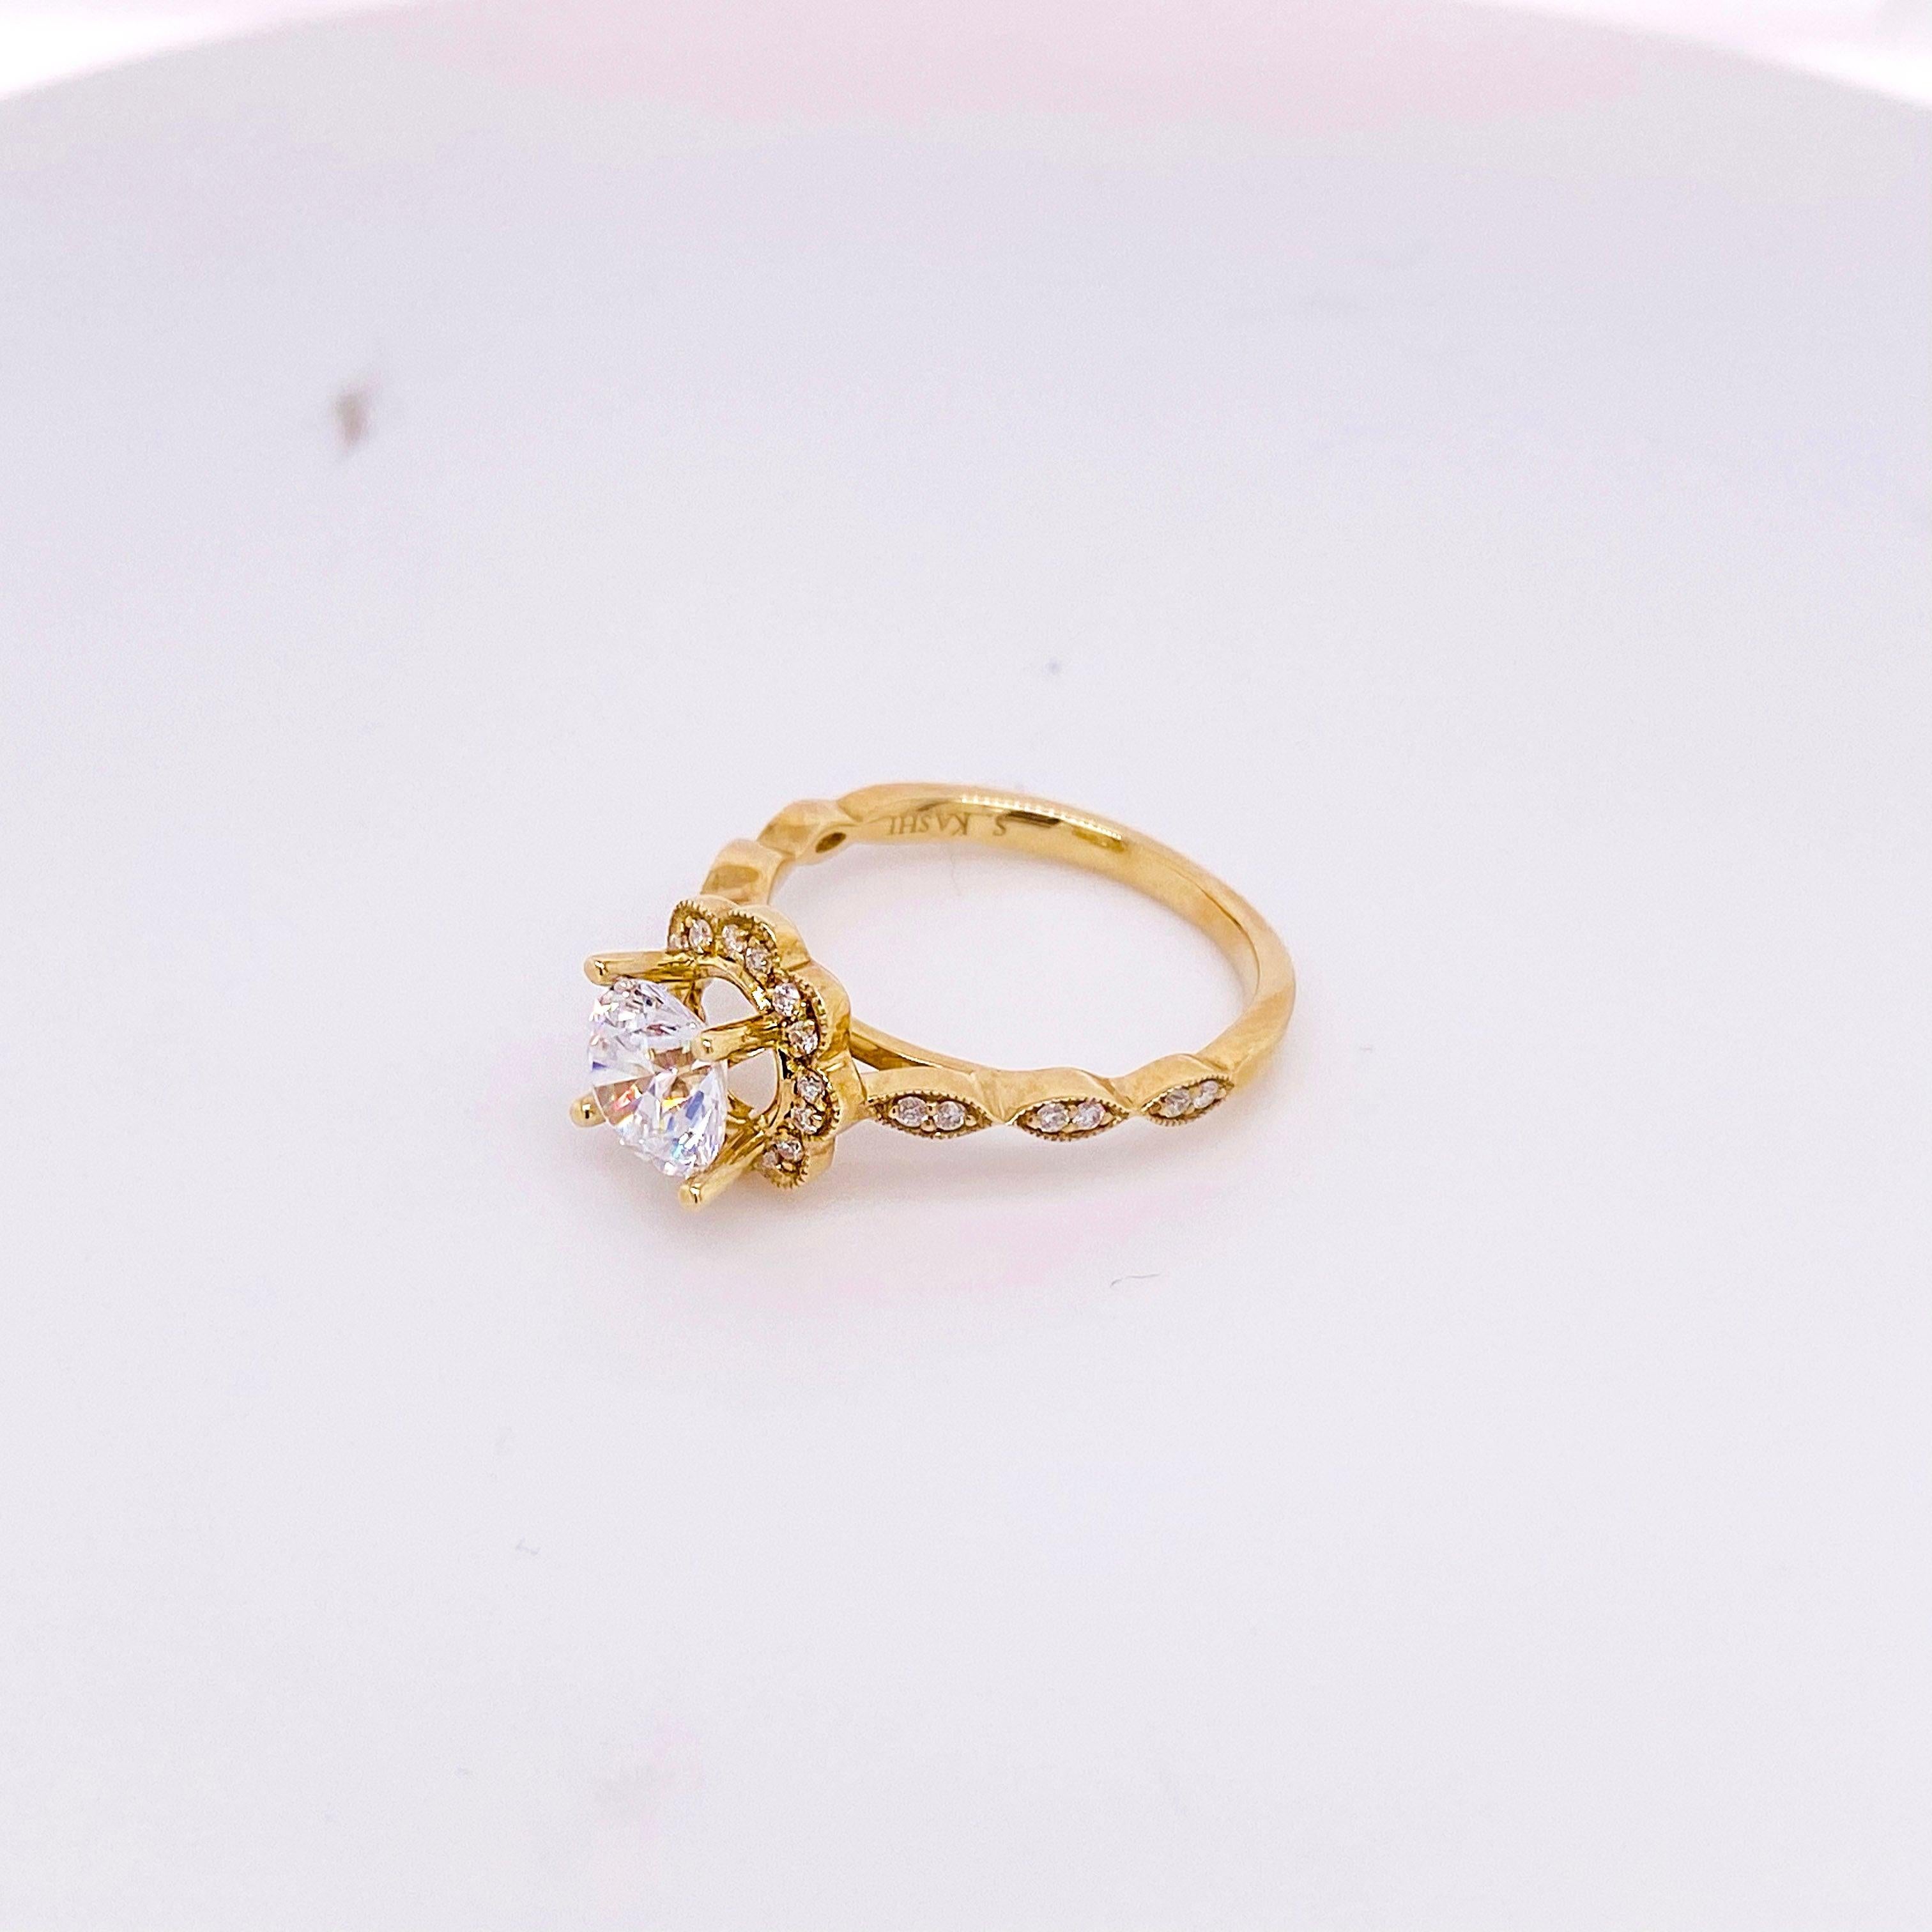 For Sale:  One Carat Diamond Engagement Ring, Flower Halo, Yellow Gold, Nature Inspired 3